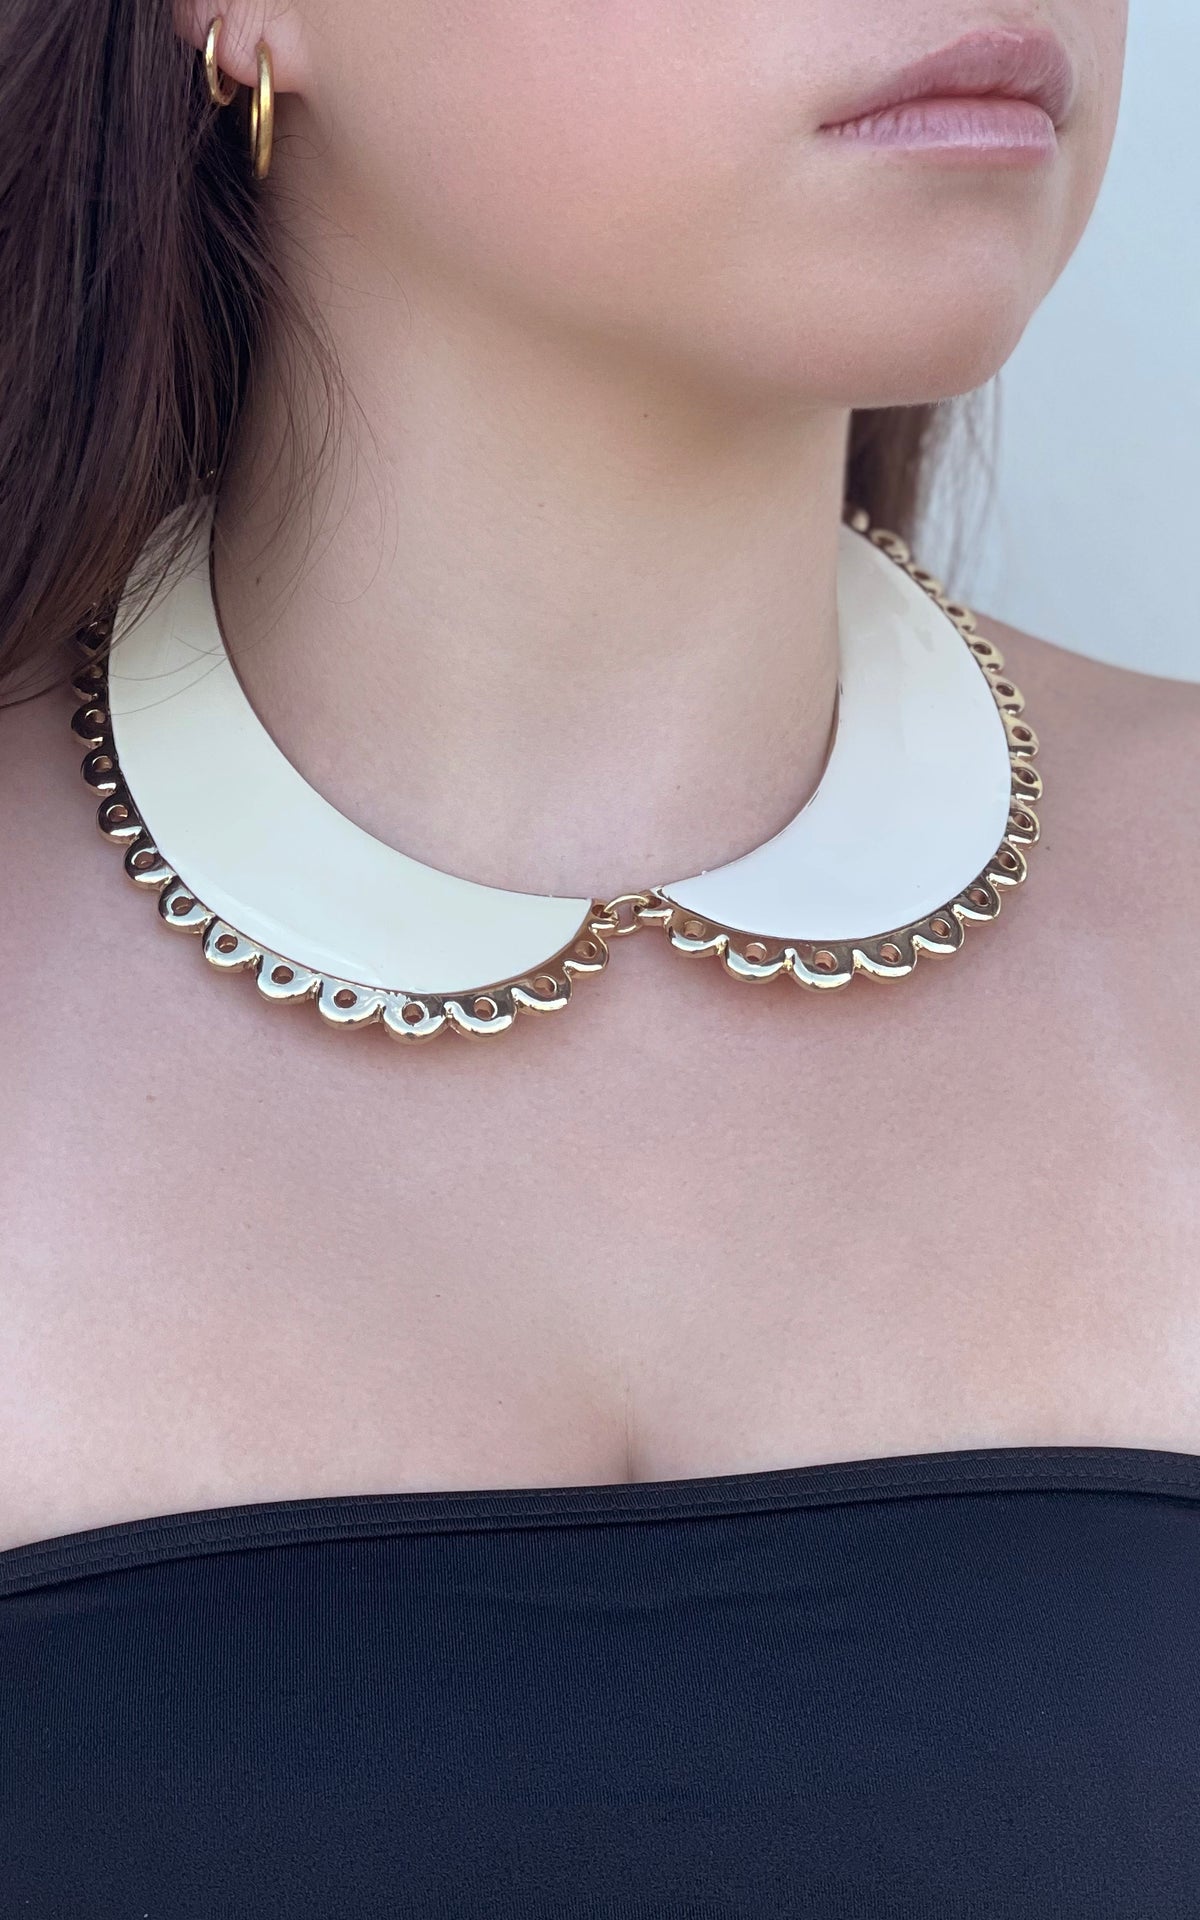 NECKLACE: White Collar Necklace with Gold Detail